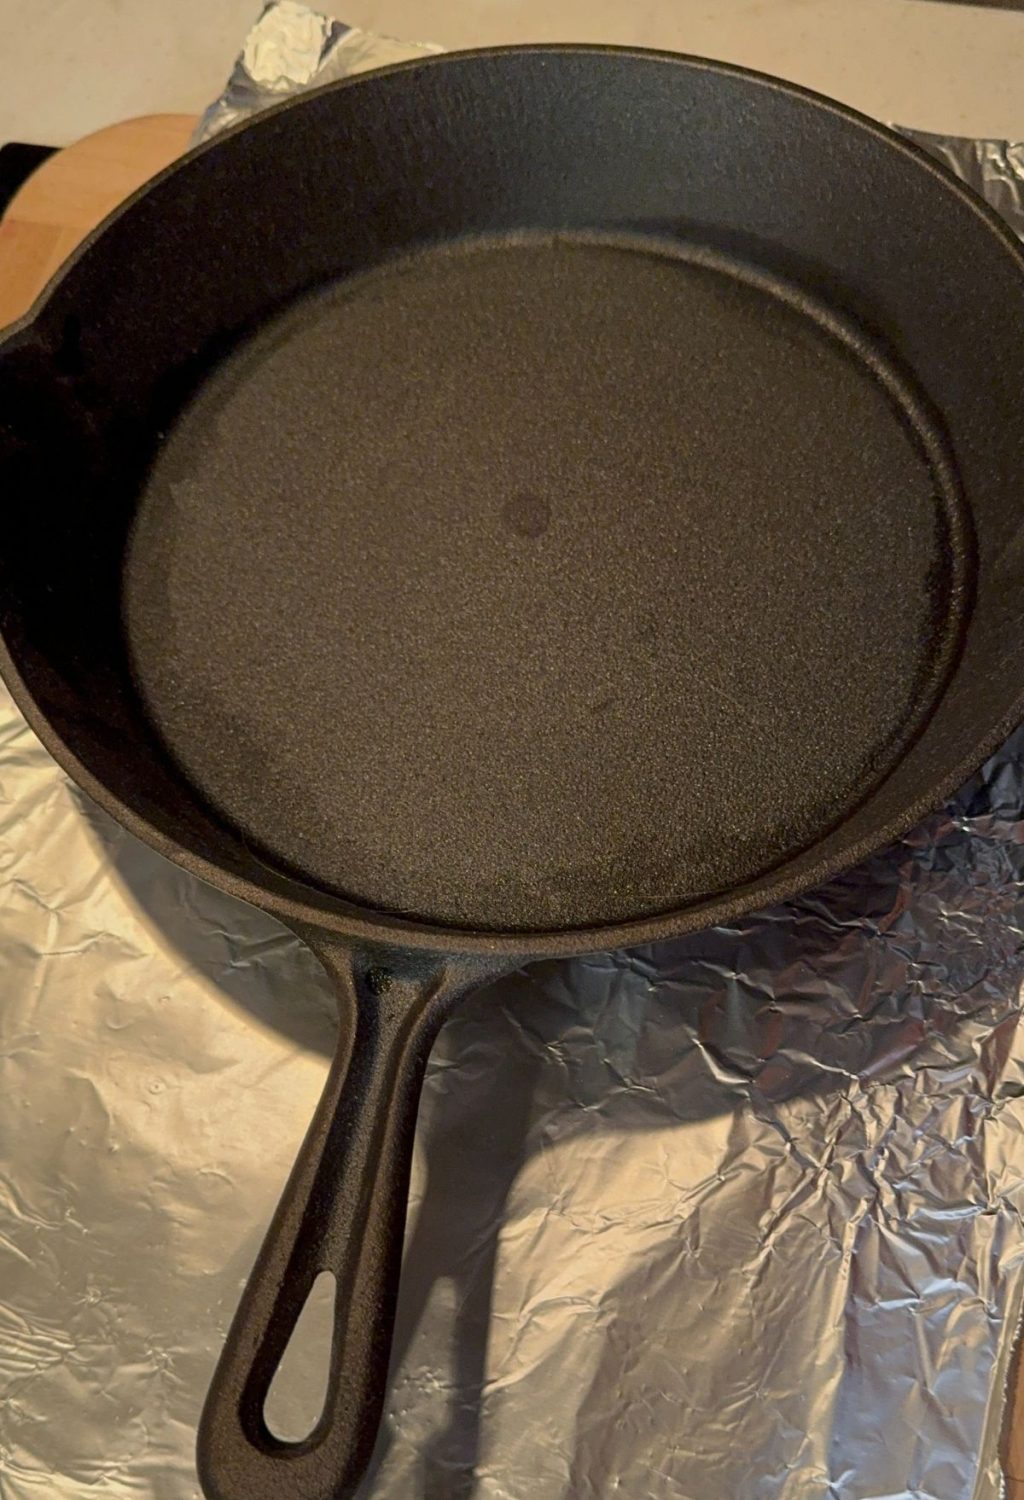 A black cast iron skillet on a table.